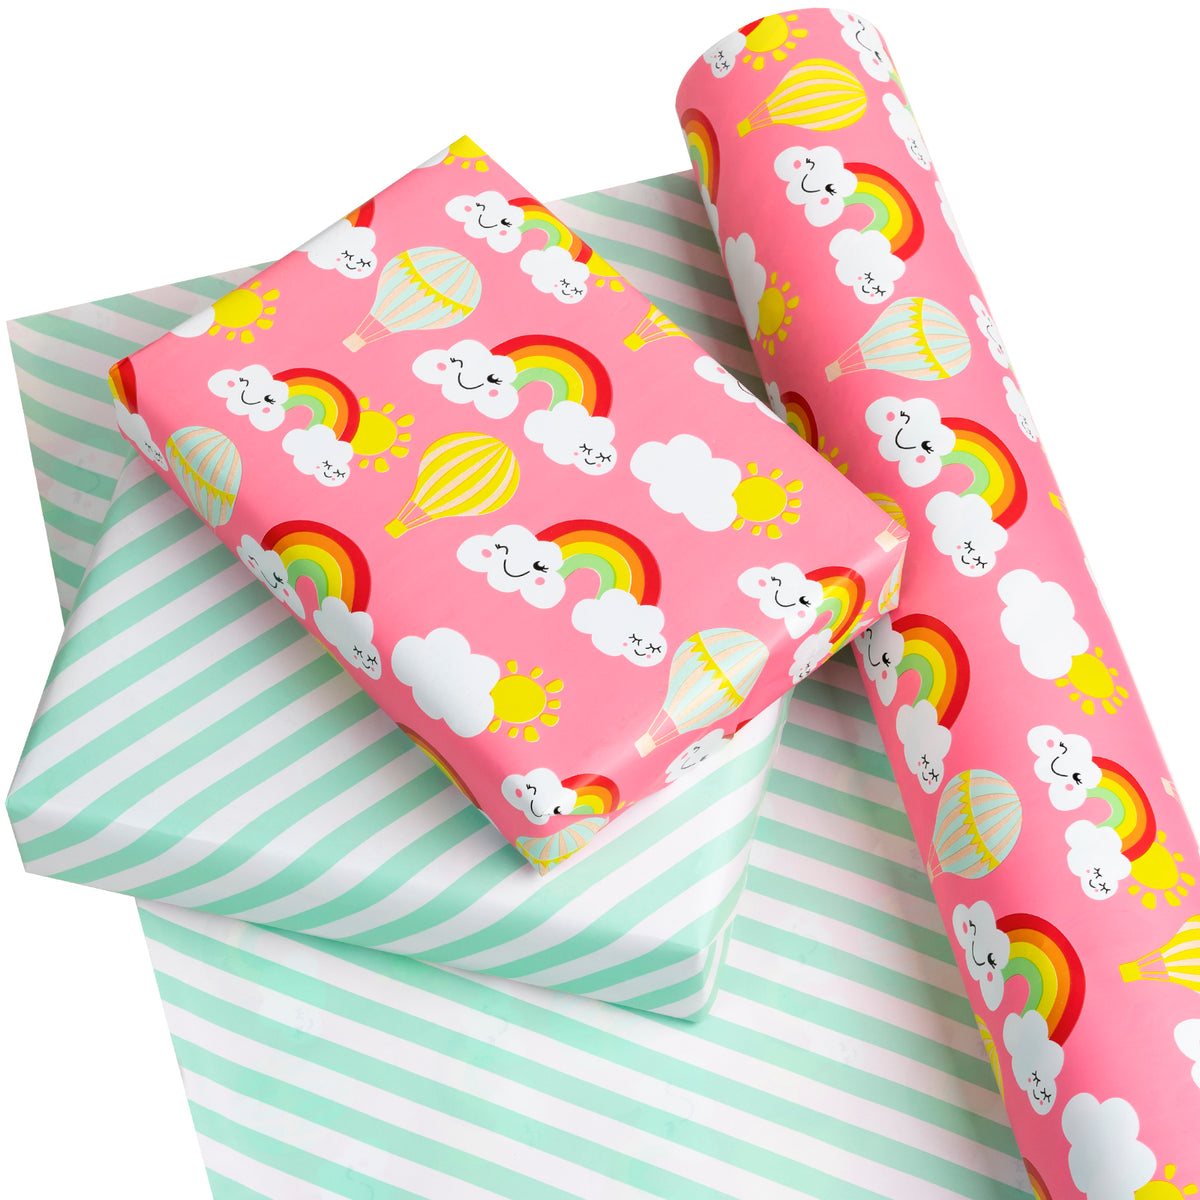 Wrapping Paper Roll, Kids Wrapping Paper Roll, Wrapping Paper Roll, 6PCS  Colorful Wrapping Paper, Birthday and Festival Wrapping Paper Gift Wrapping  50cm x 70cm(Fold delivery)